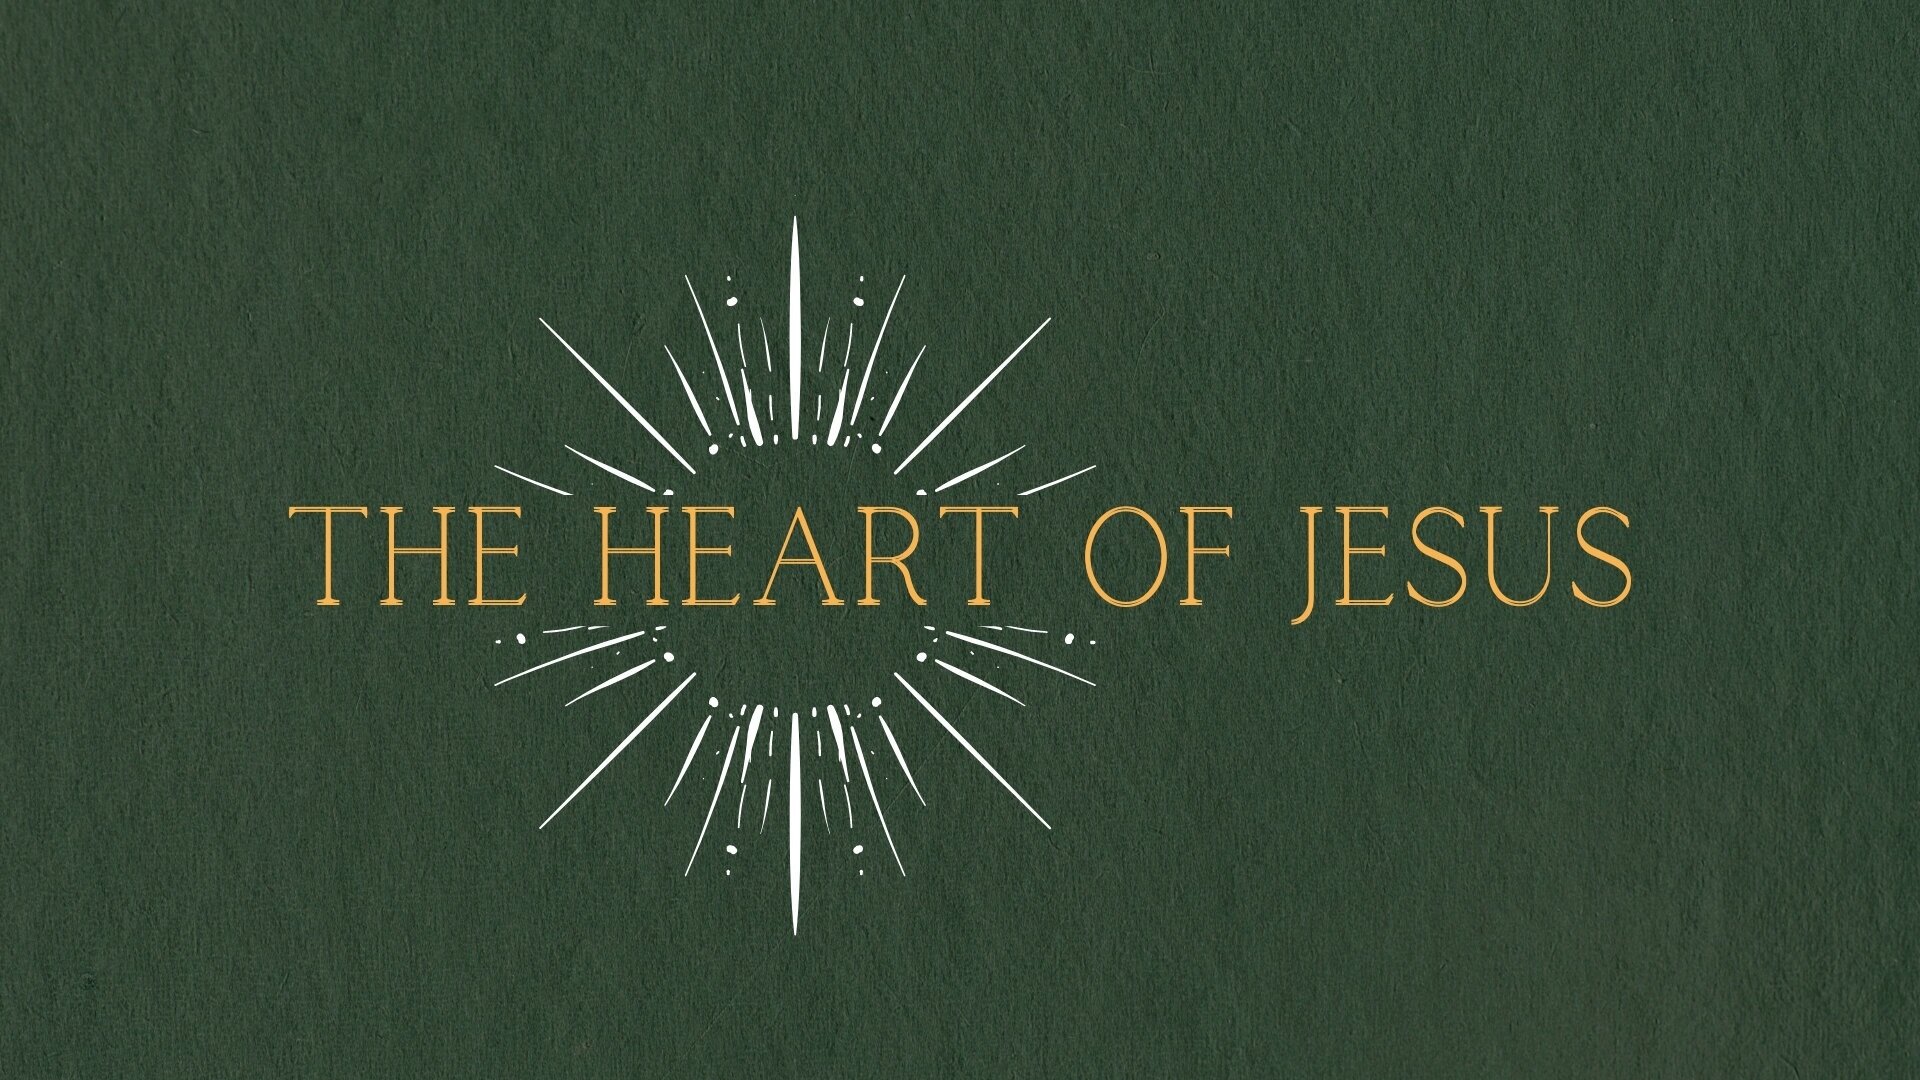 Message Series: The Heart Of Jesus